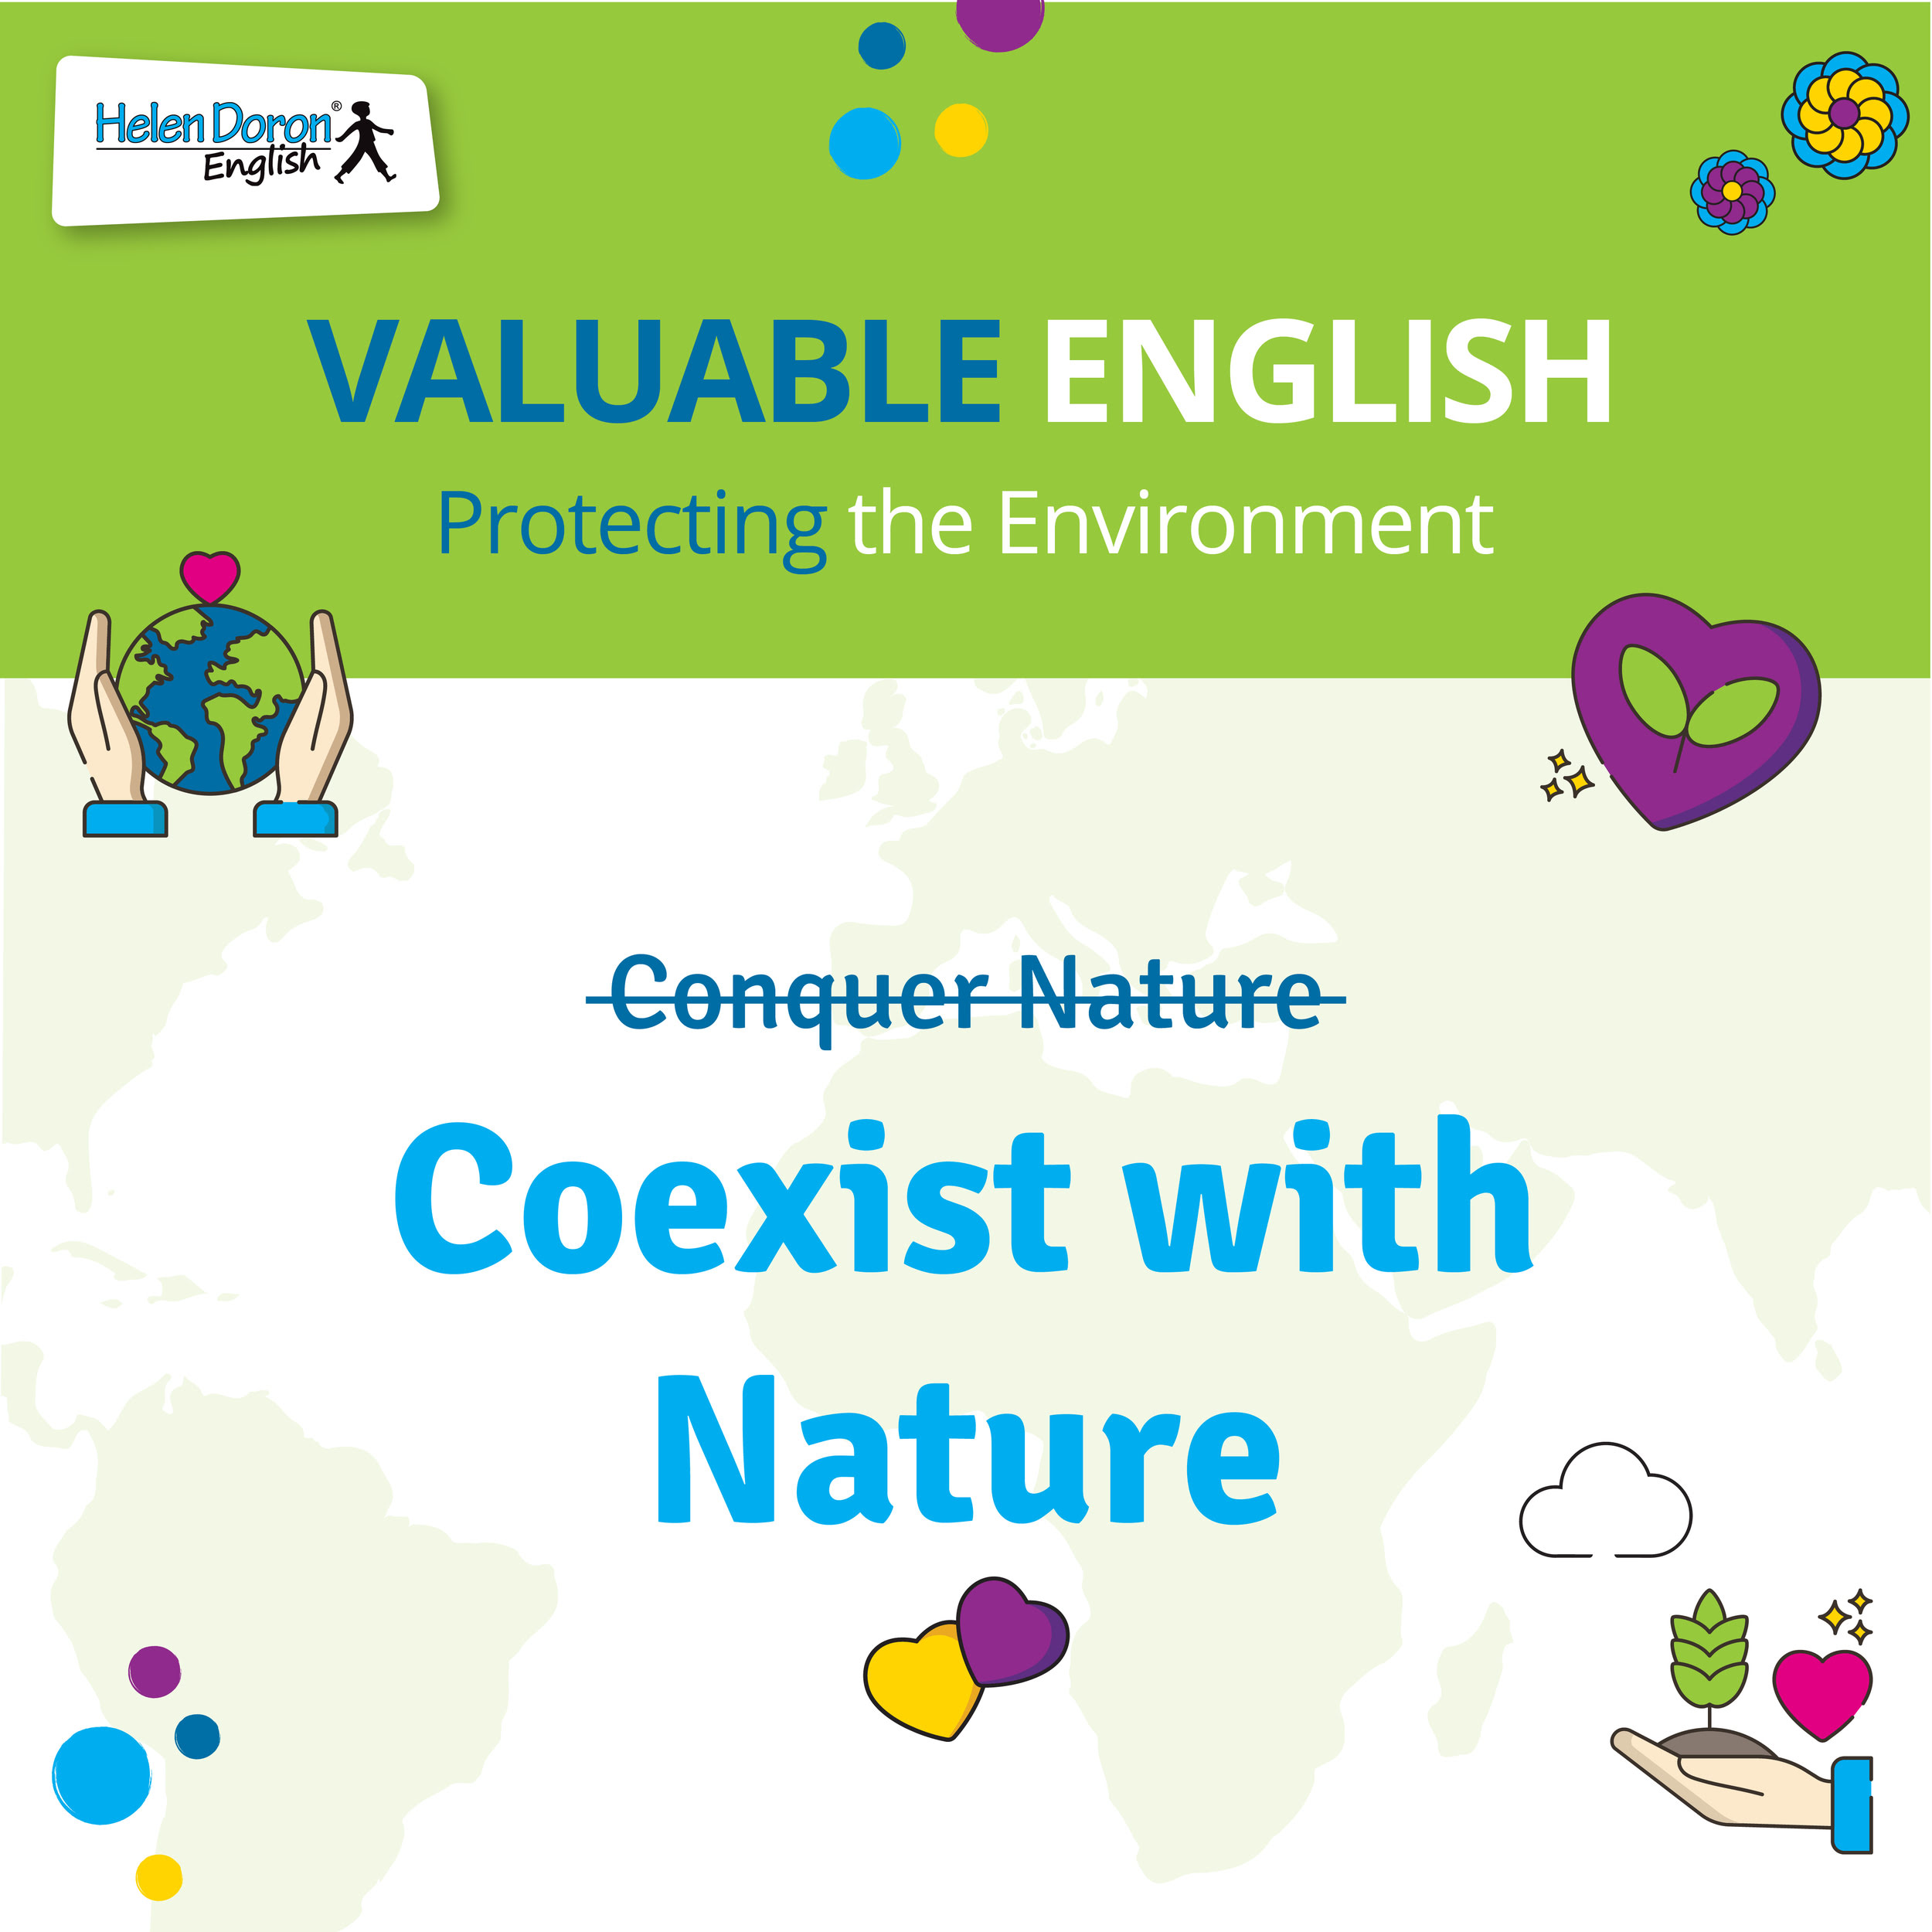 co-exist with nature Valuable English